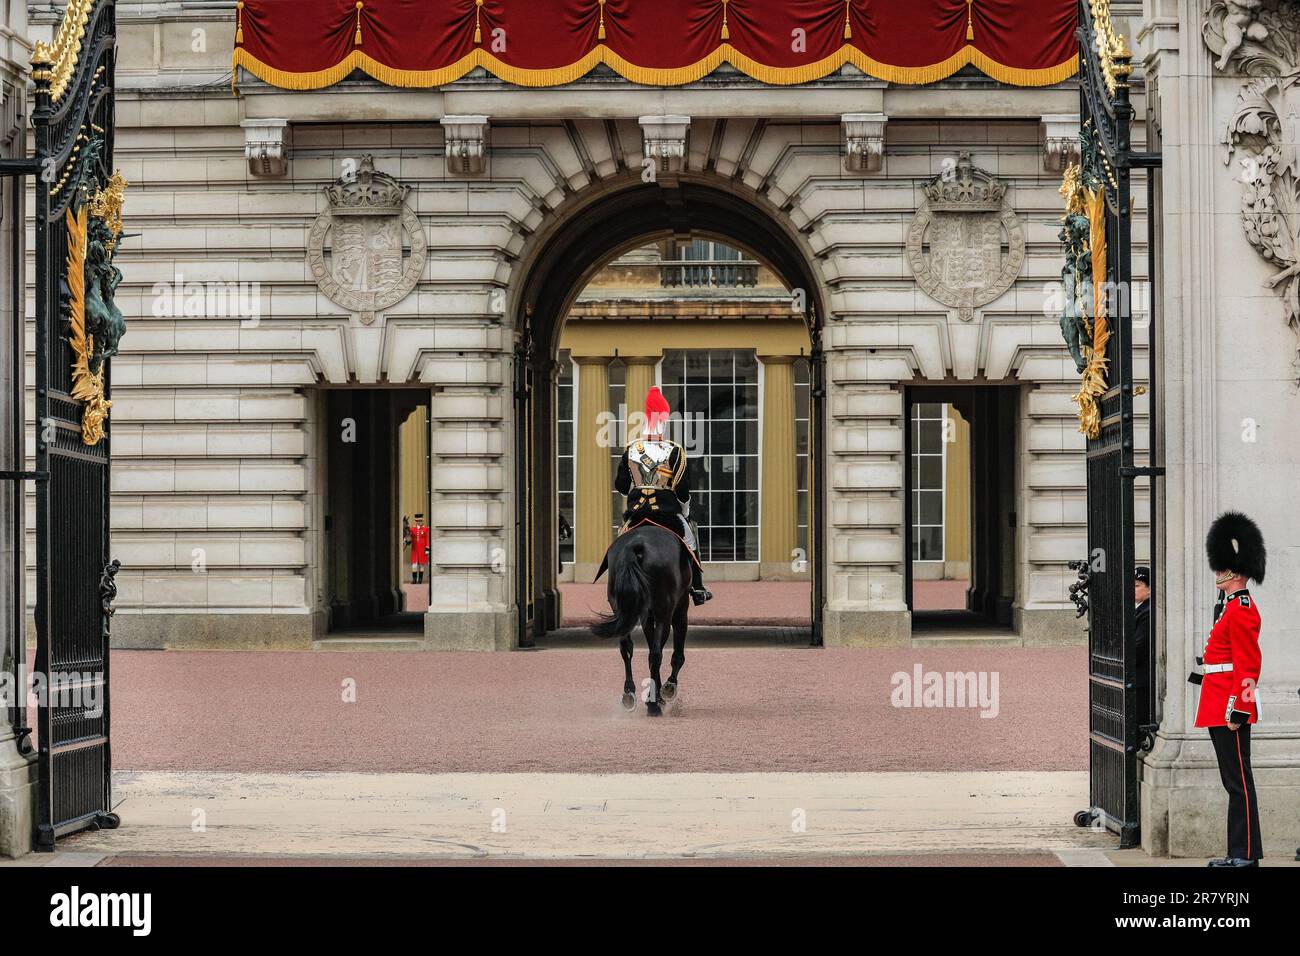 London, England, UK. 17th June, 2023. Preparations at Buckingham Palace courtyard before the parade. The annual Trooping The Colour parade to celebrate the birthday of the monarch, His Royal Highness King Charless III, attended by the Royal Family. Credit: Edler Images/Alamy Live News Stock Photo